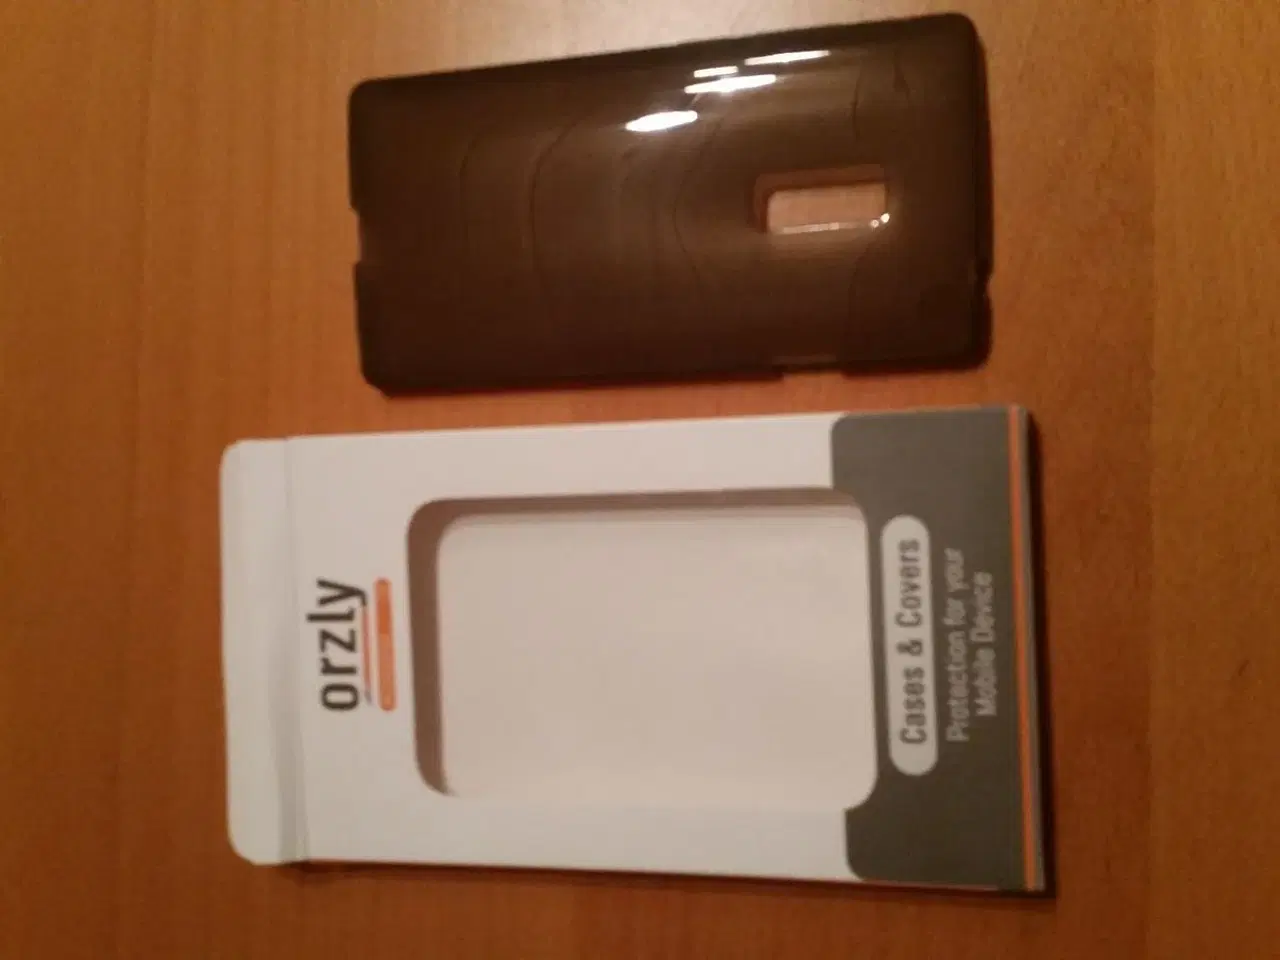 Billede 2 - One plus two cover 